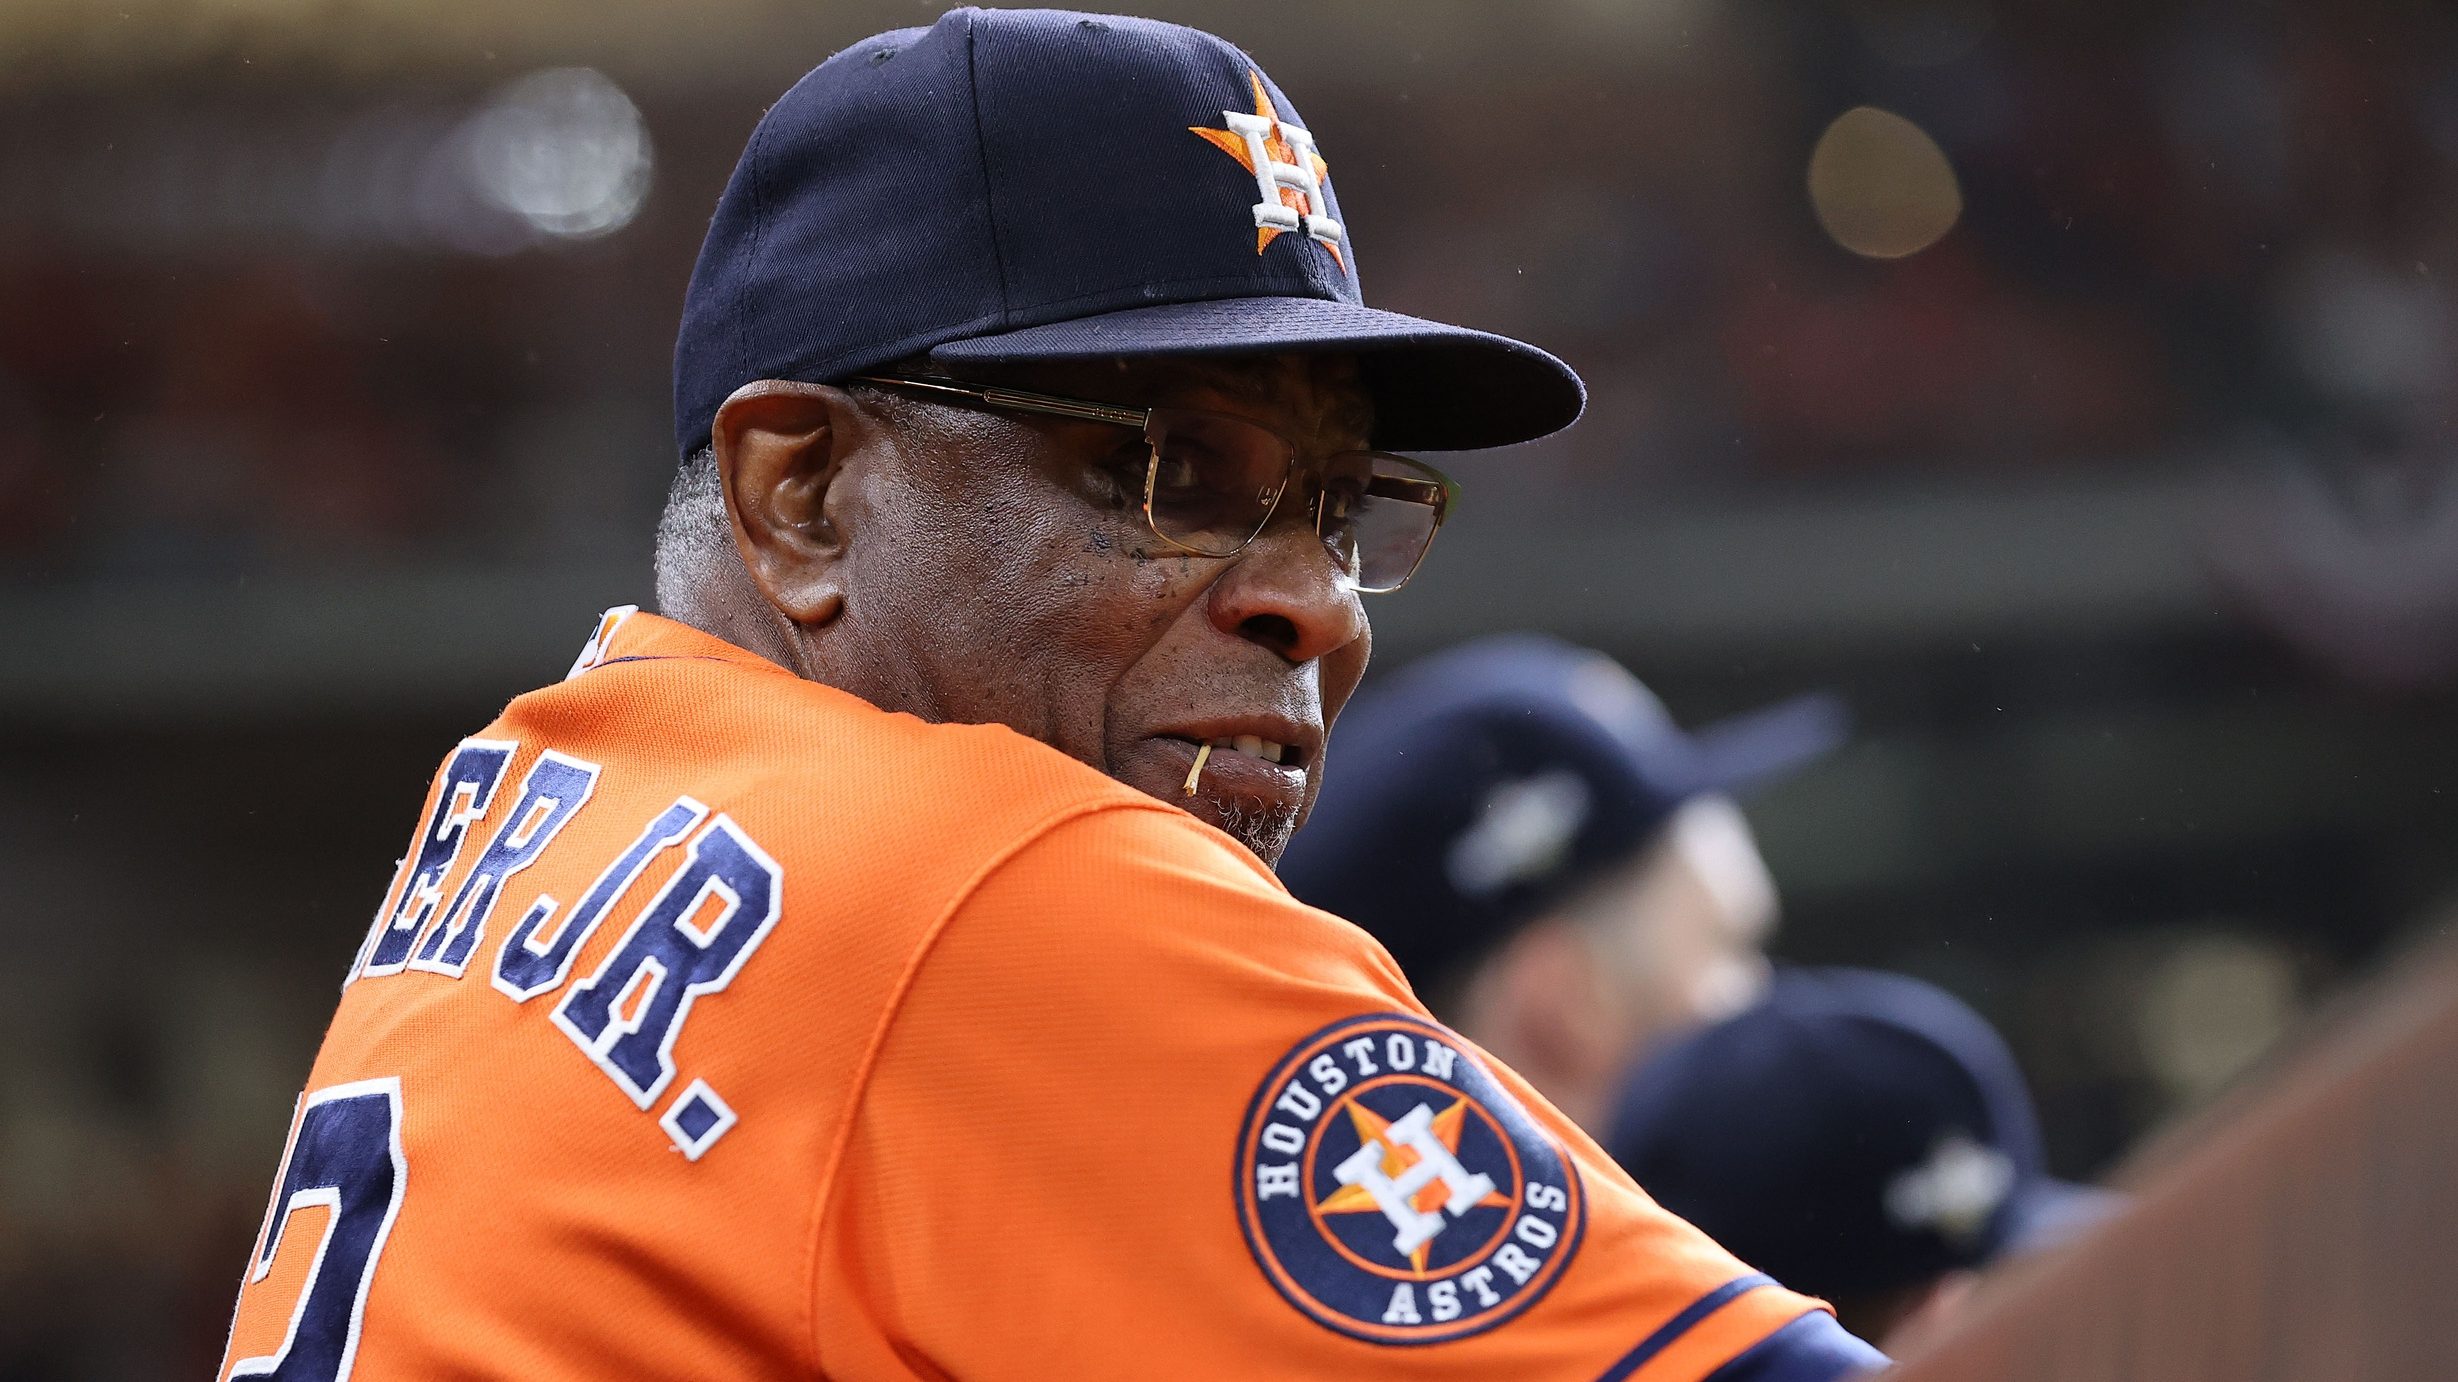 Dusty Baker stays on as Astros manager